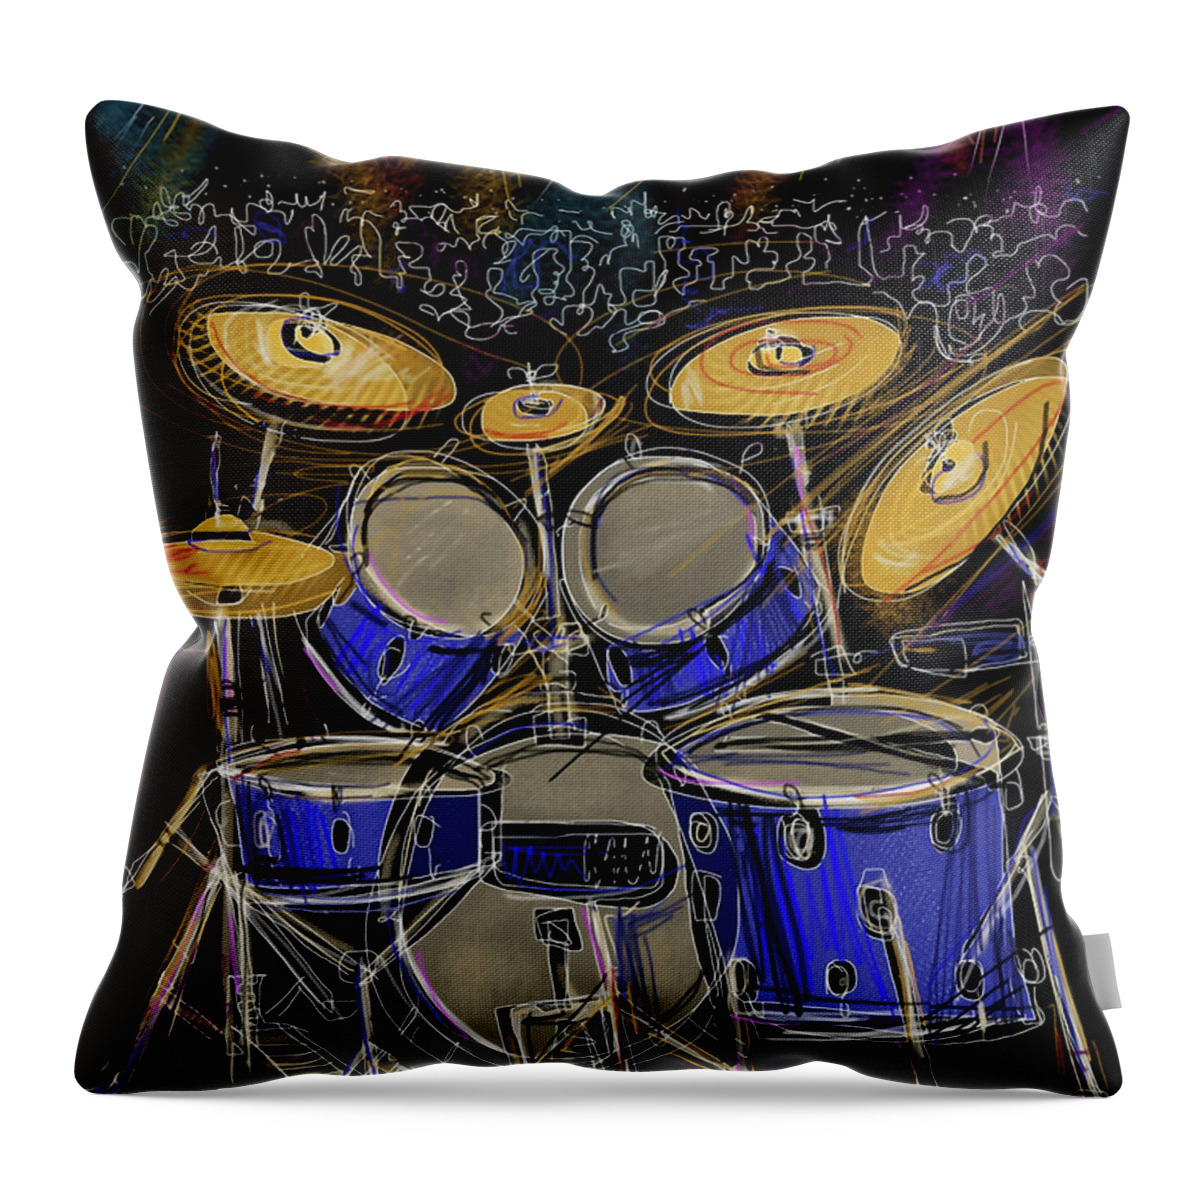 Drums Throw Pillow featuring the digital art Boom crash by Russell Pierce